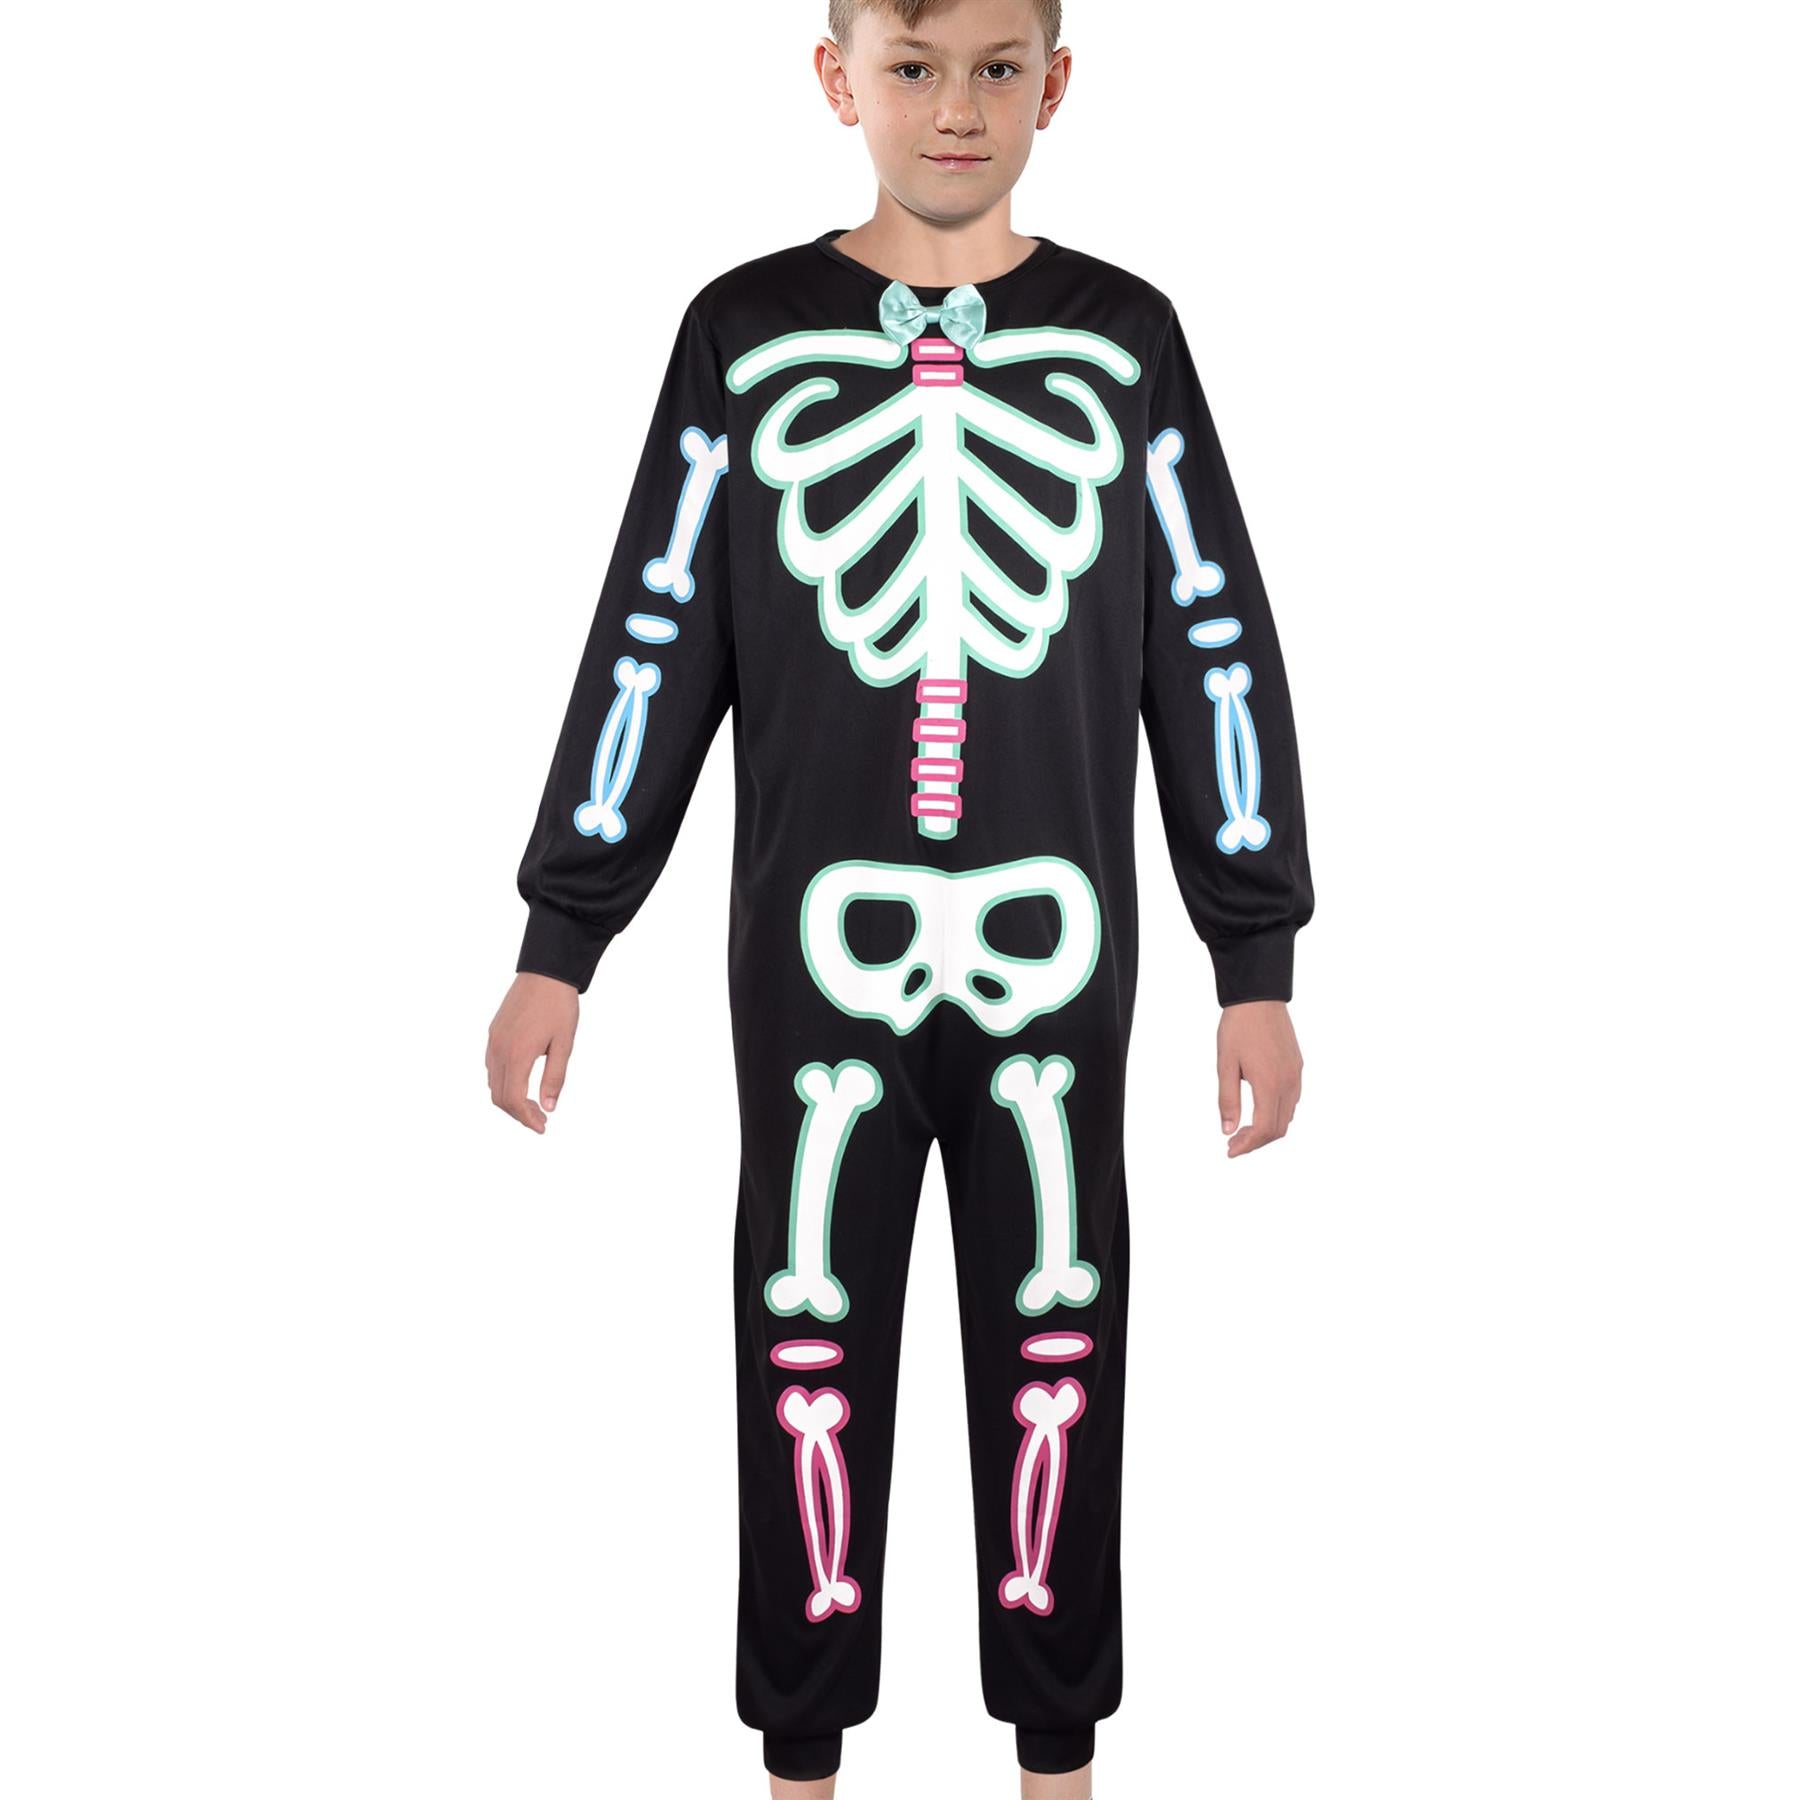 Kids Boys Skeleton Costume With Bow Tie Halloween Onesie For Trick Or Treating